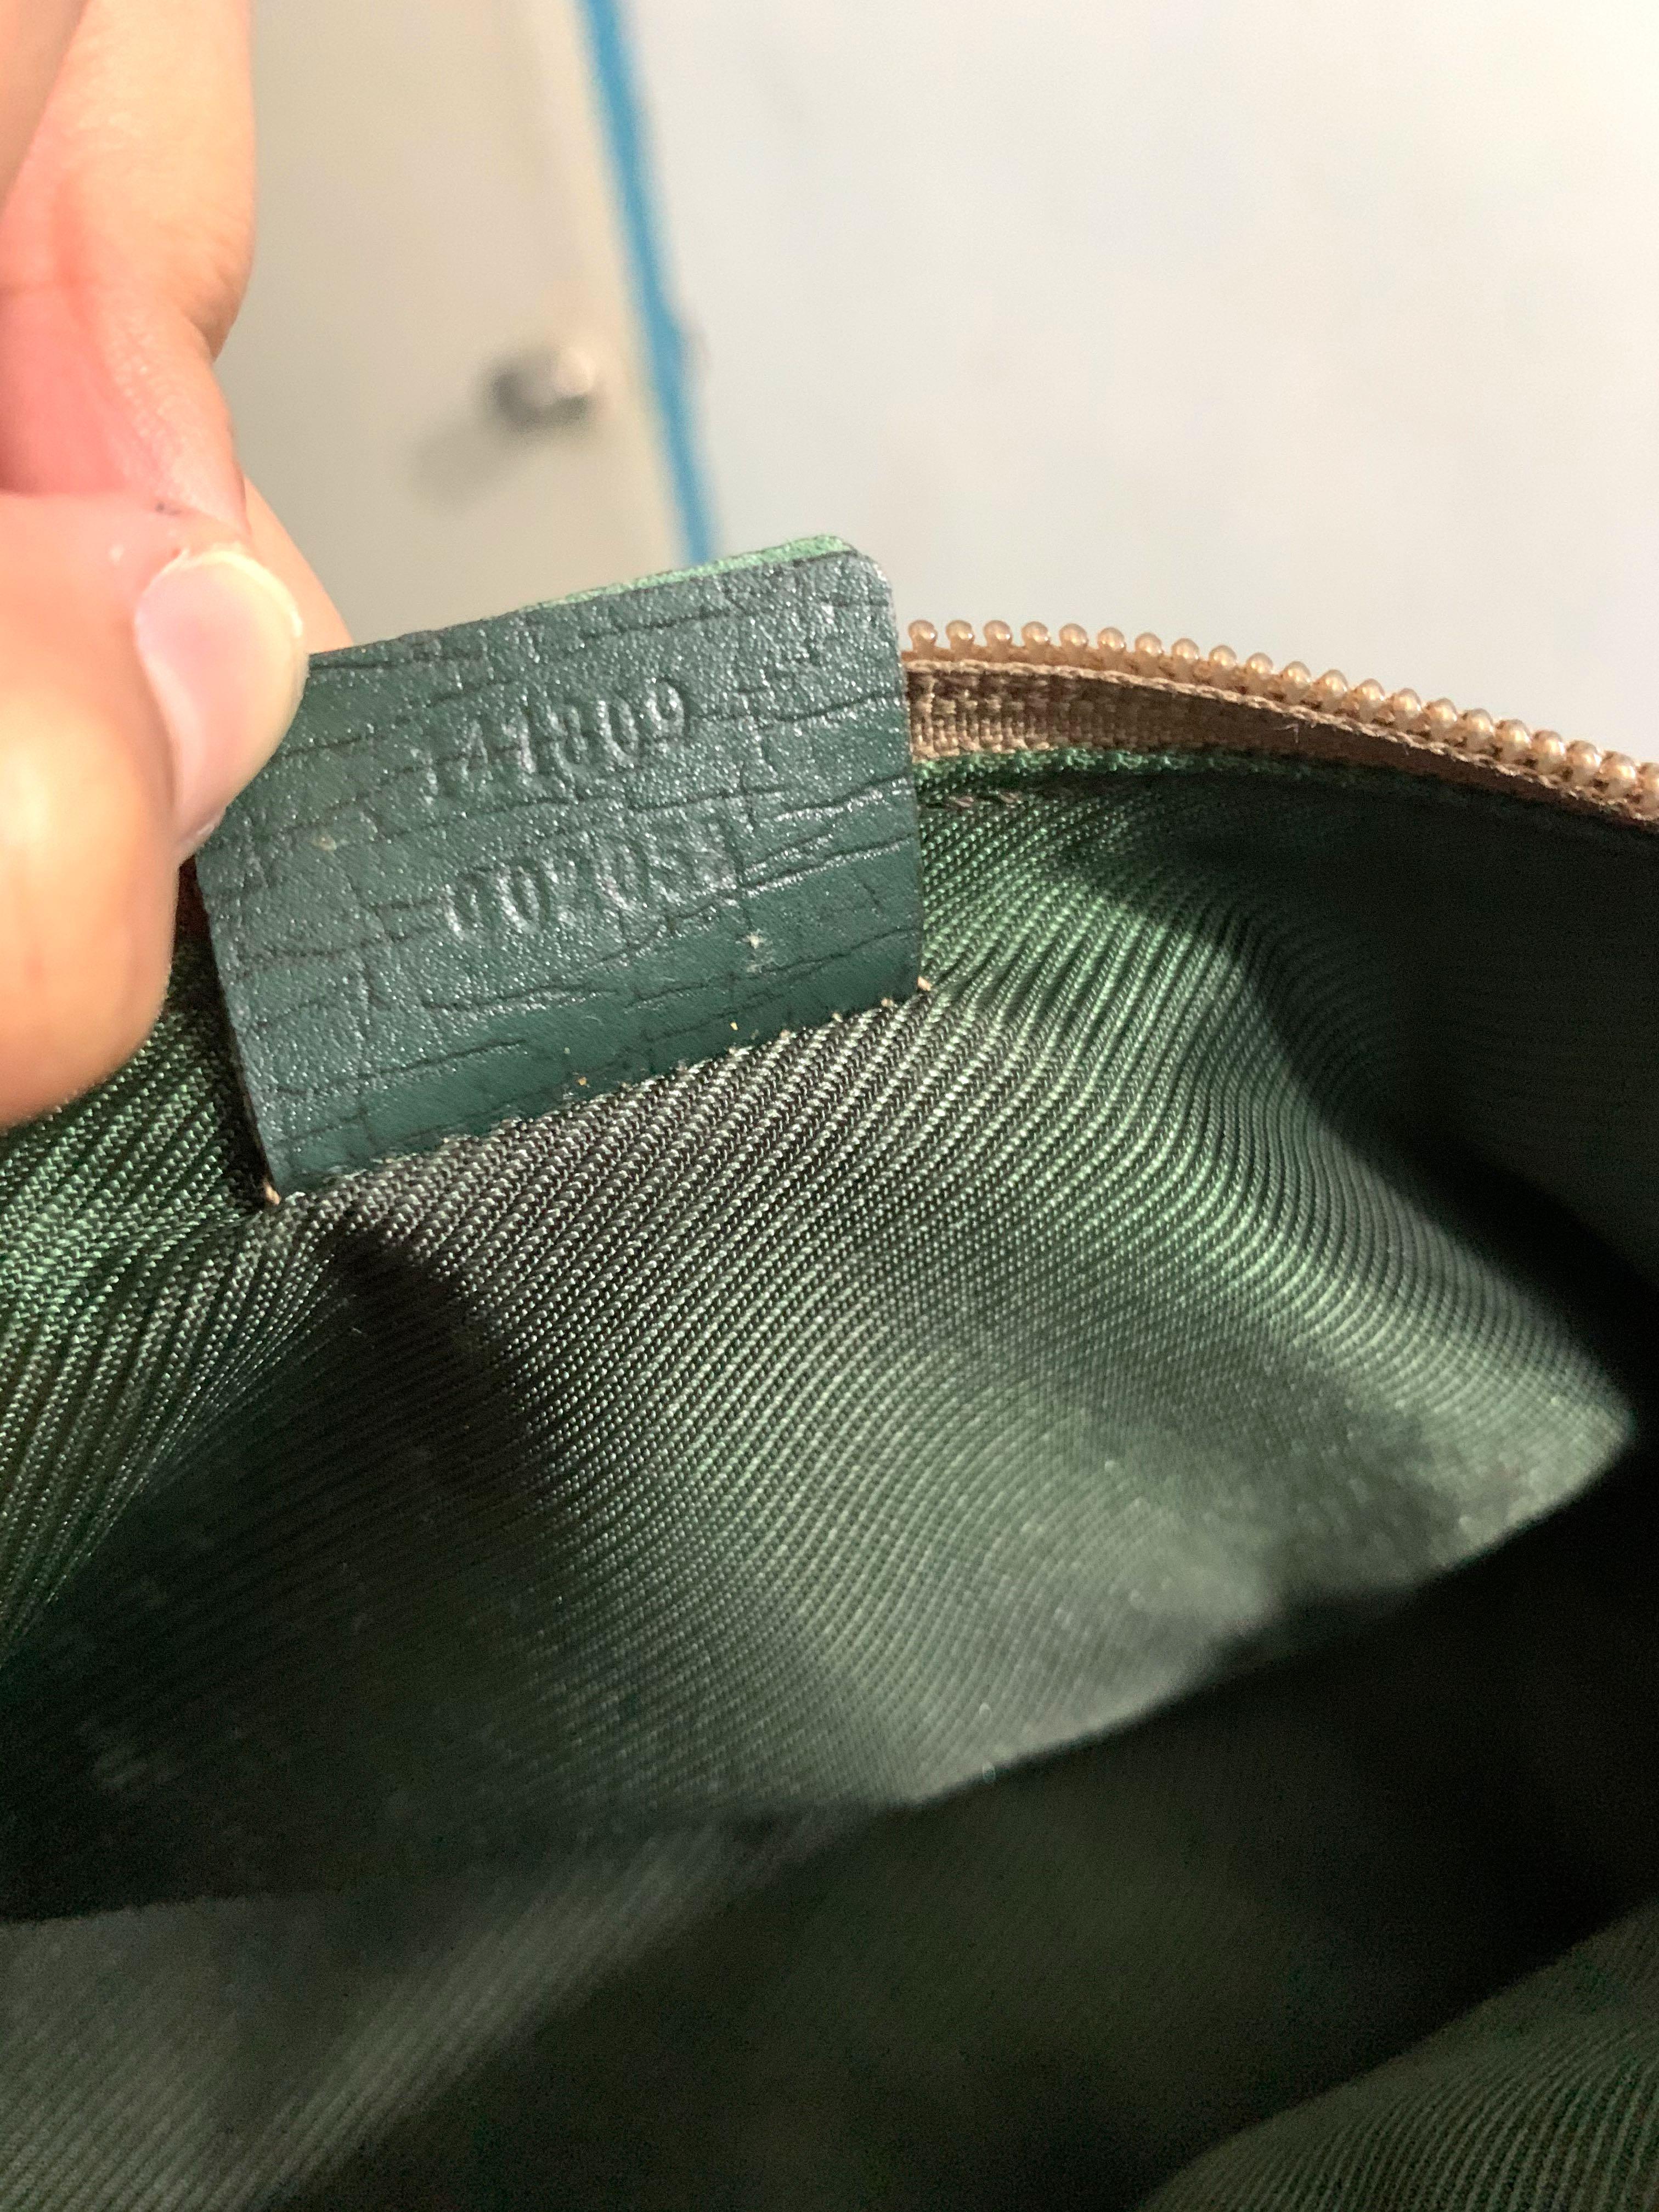 VINTAGE GUCCI BOAT POCHETTE, HOW MY OLDEST BAG HAS HELD UP AFTER 20 YEARS